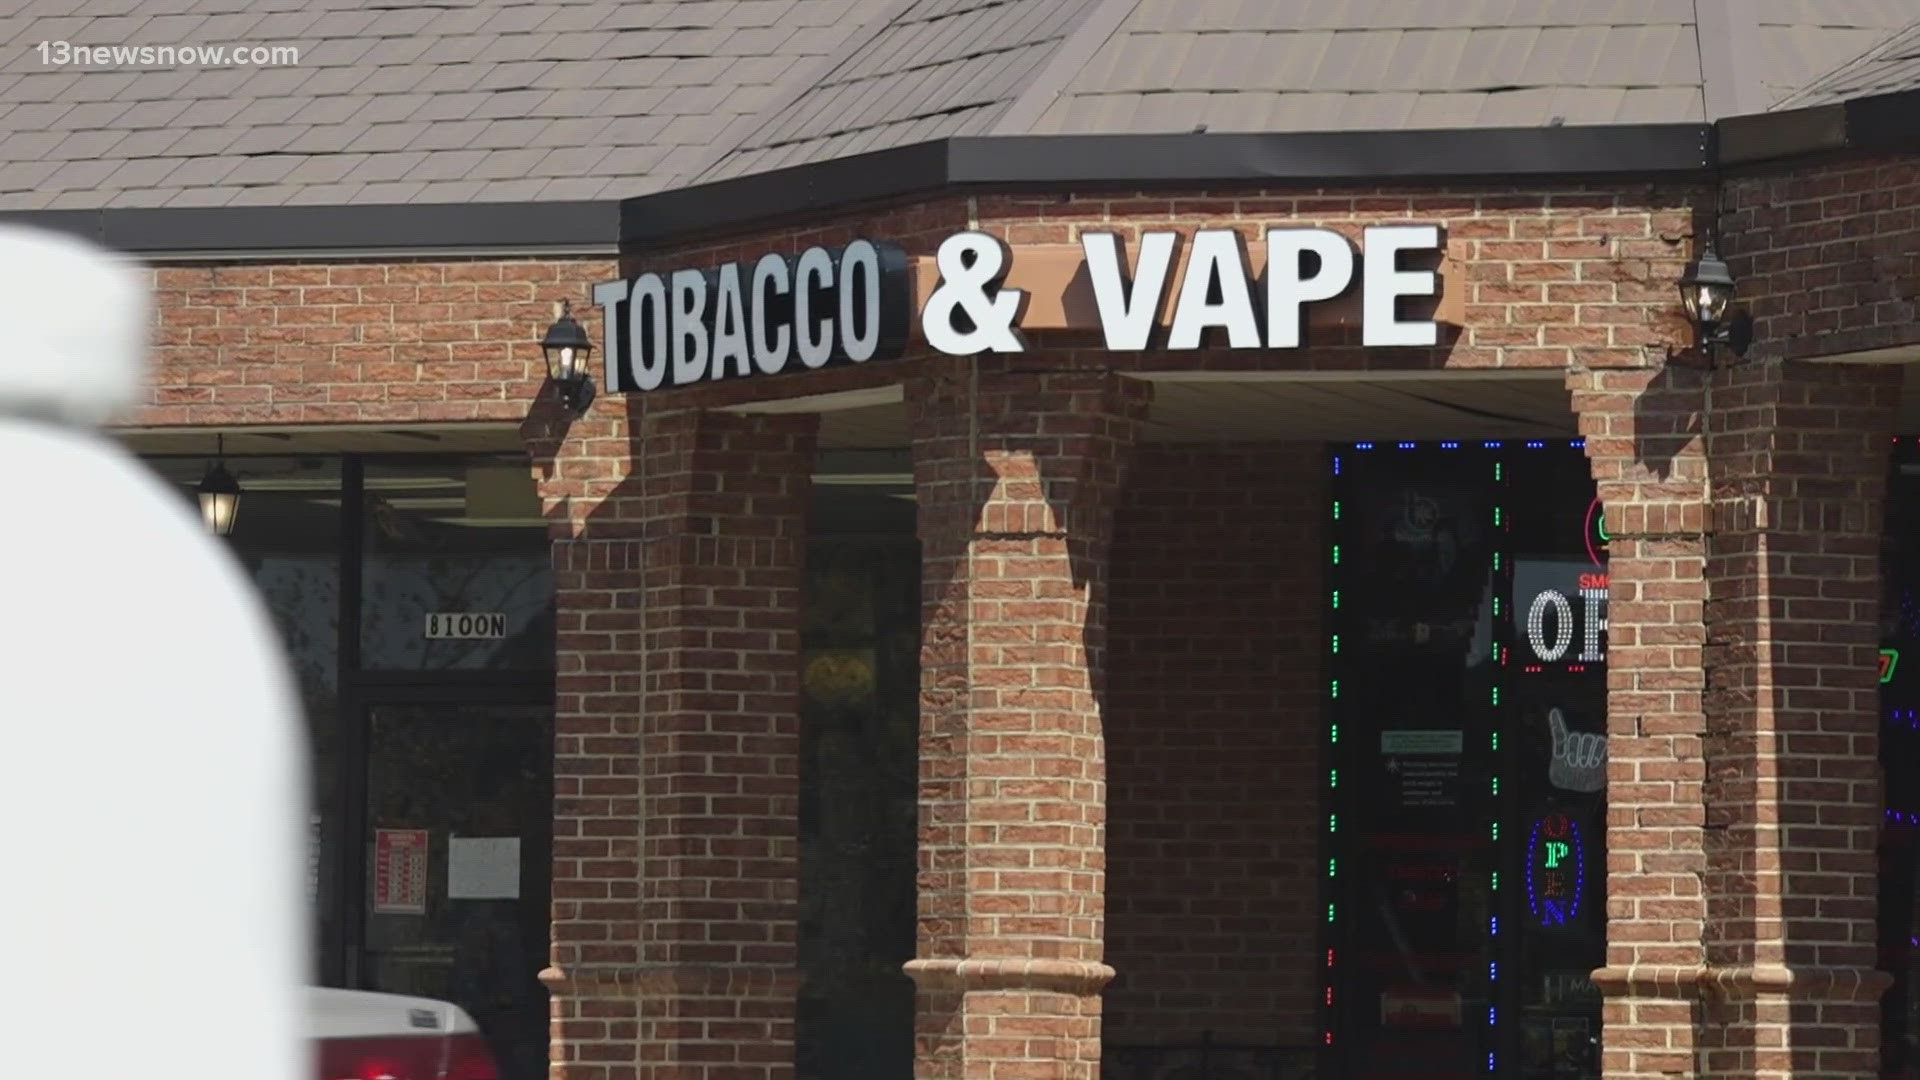 The York-Poquoson Sheriff's Office said it launched an investigation after receiving reports that the store was selling vape products to minors.